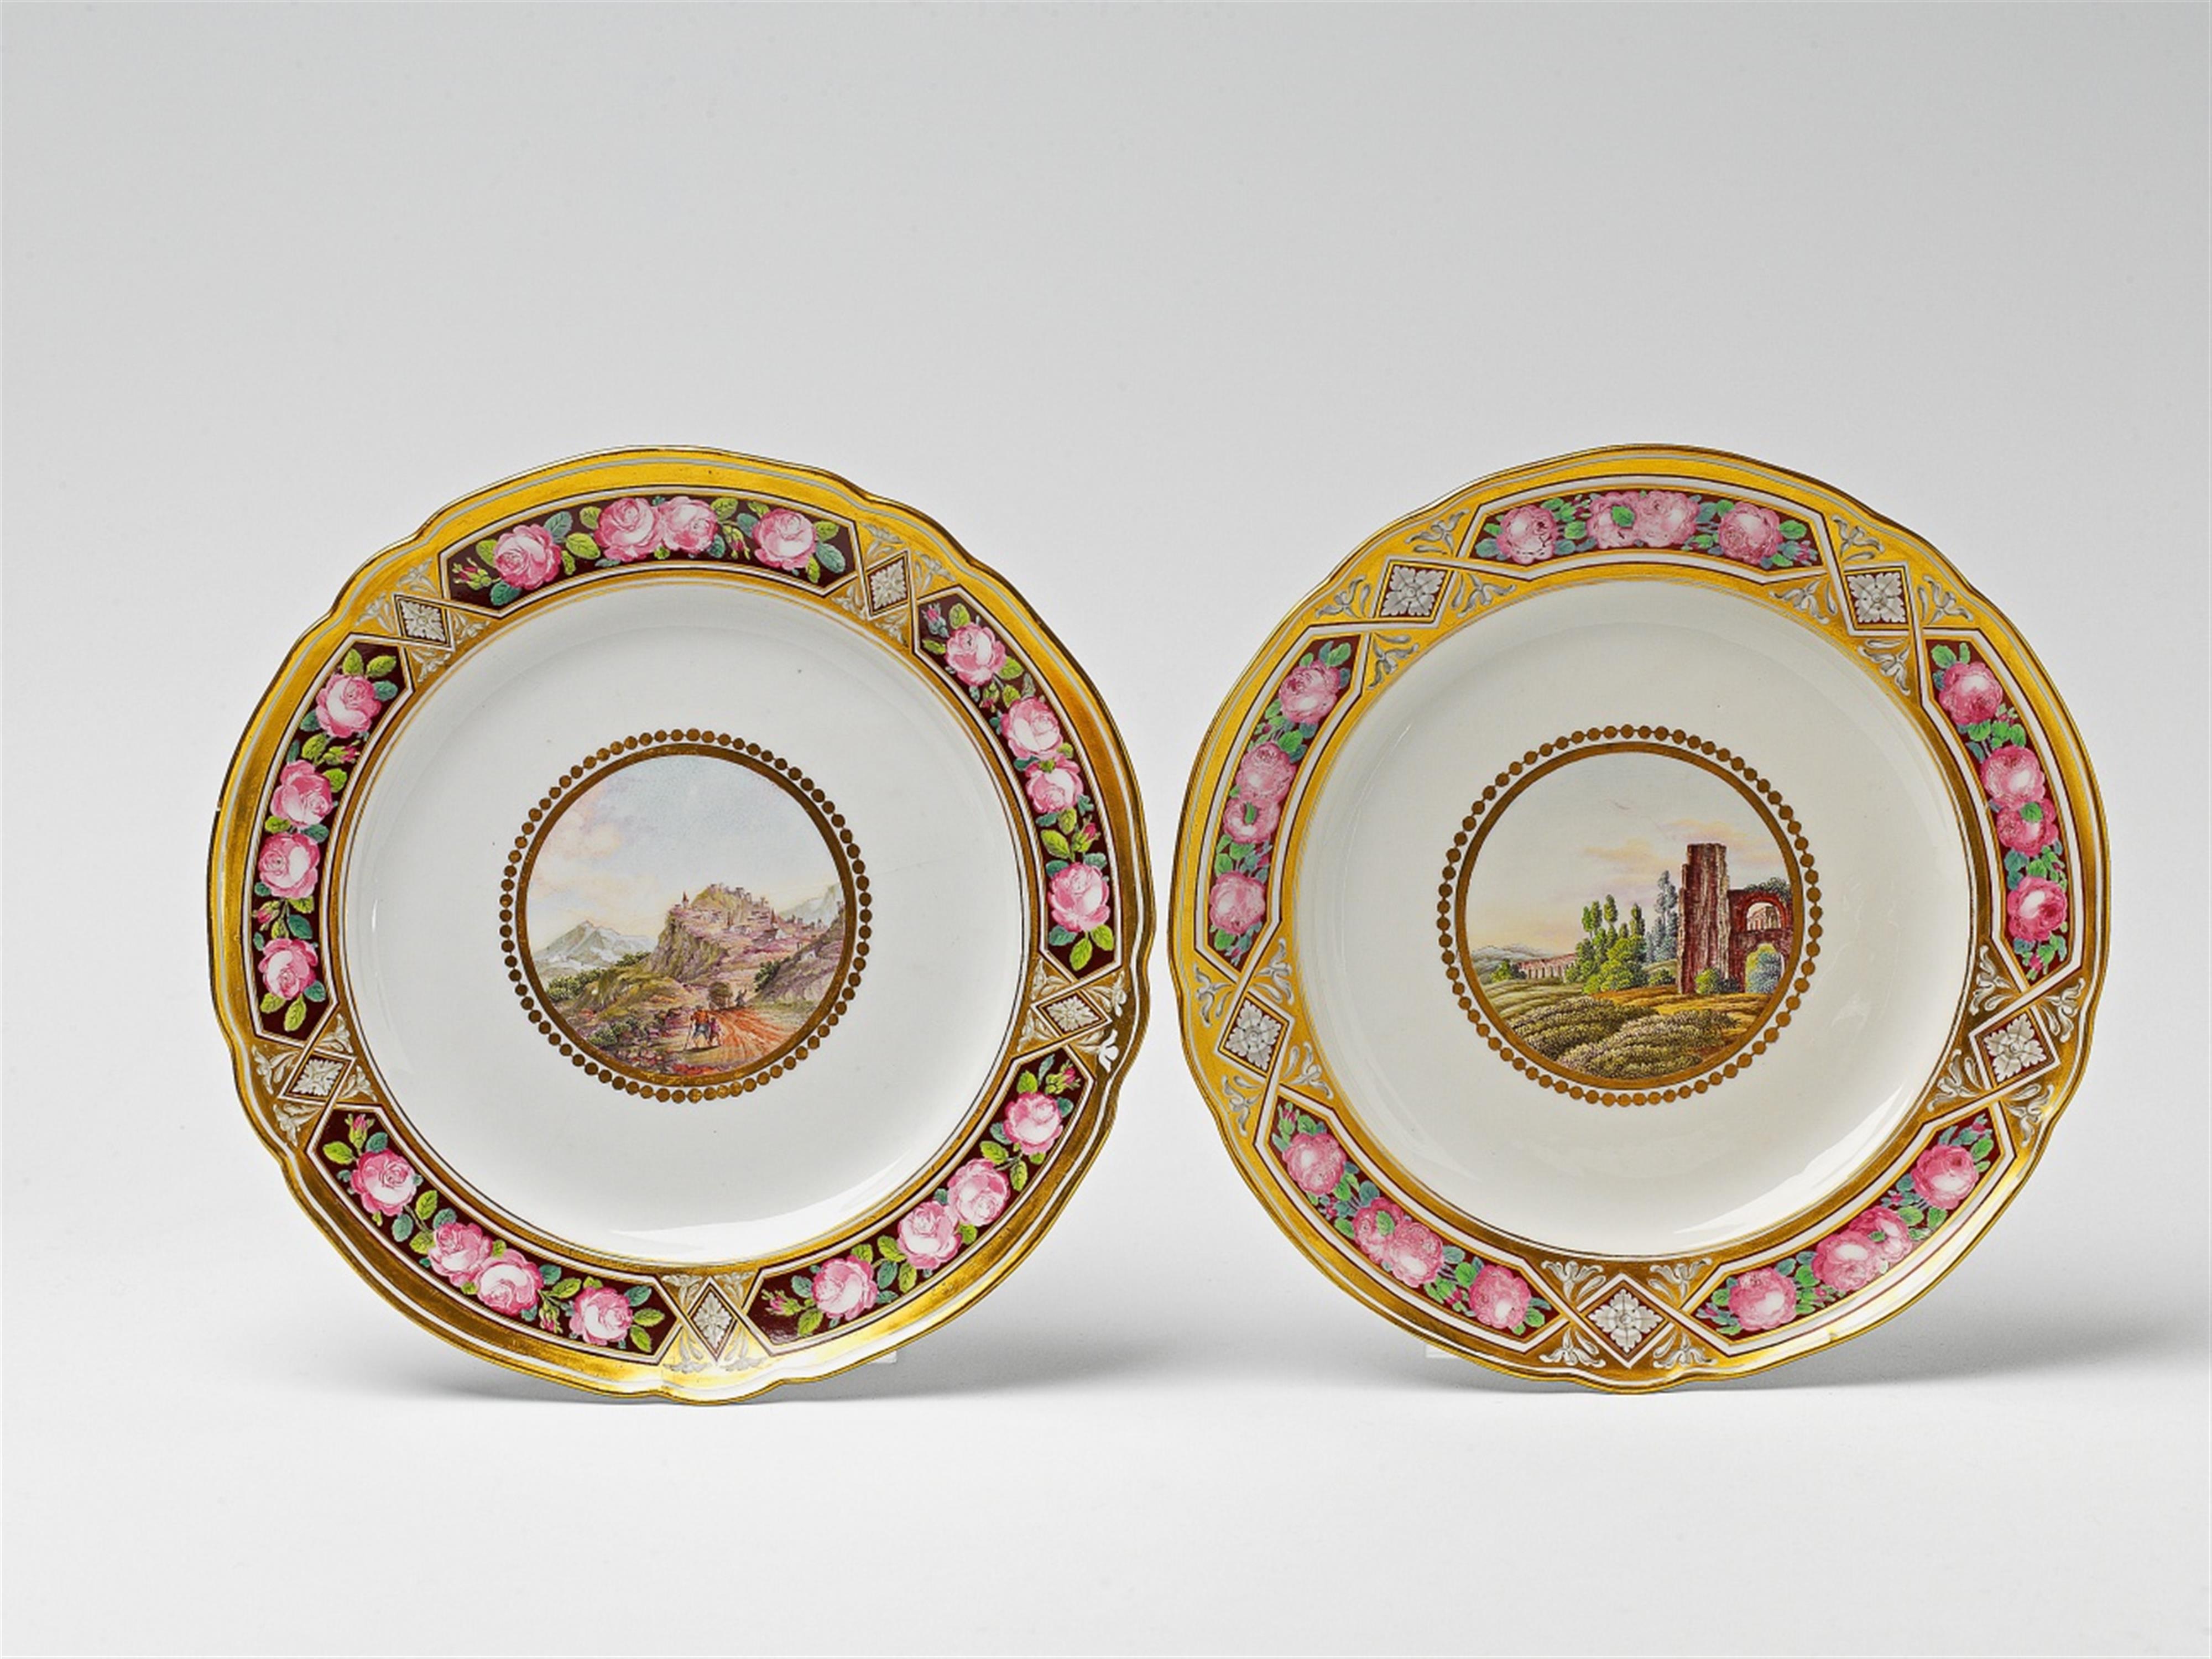 Two St. Petersburg porcelain plates from the wedding service of Grand Duchess Maria Pavlovna - image-1